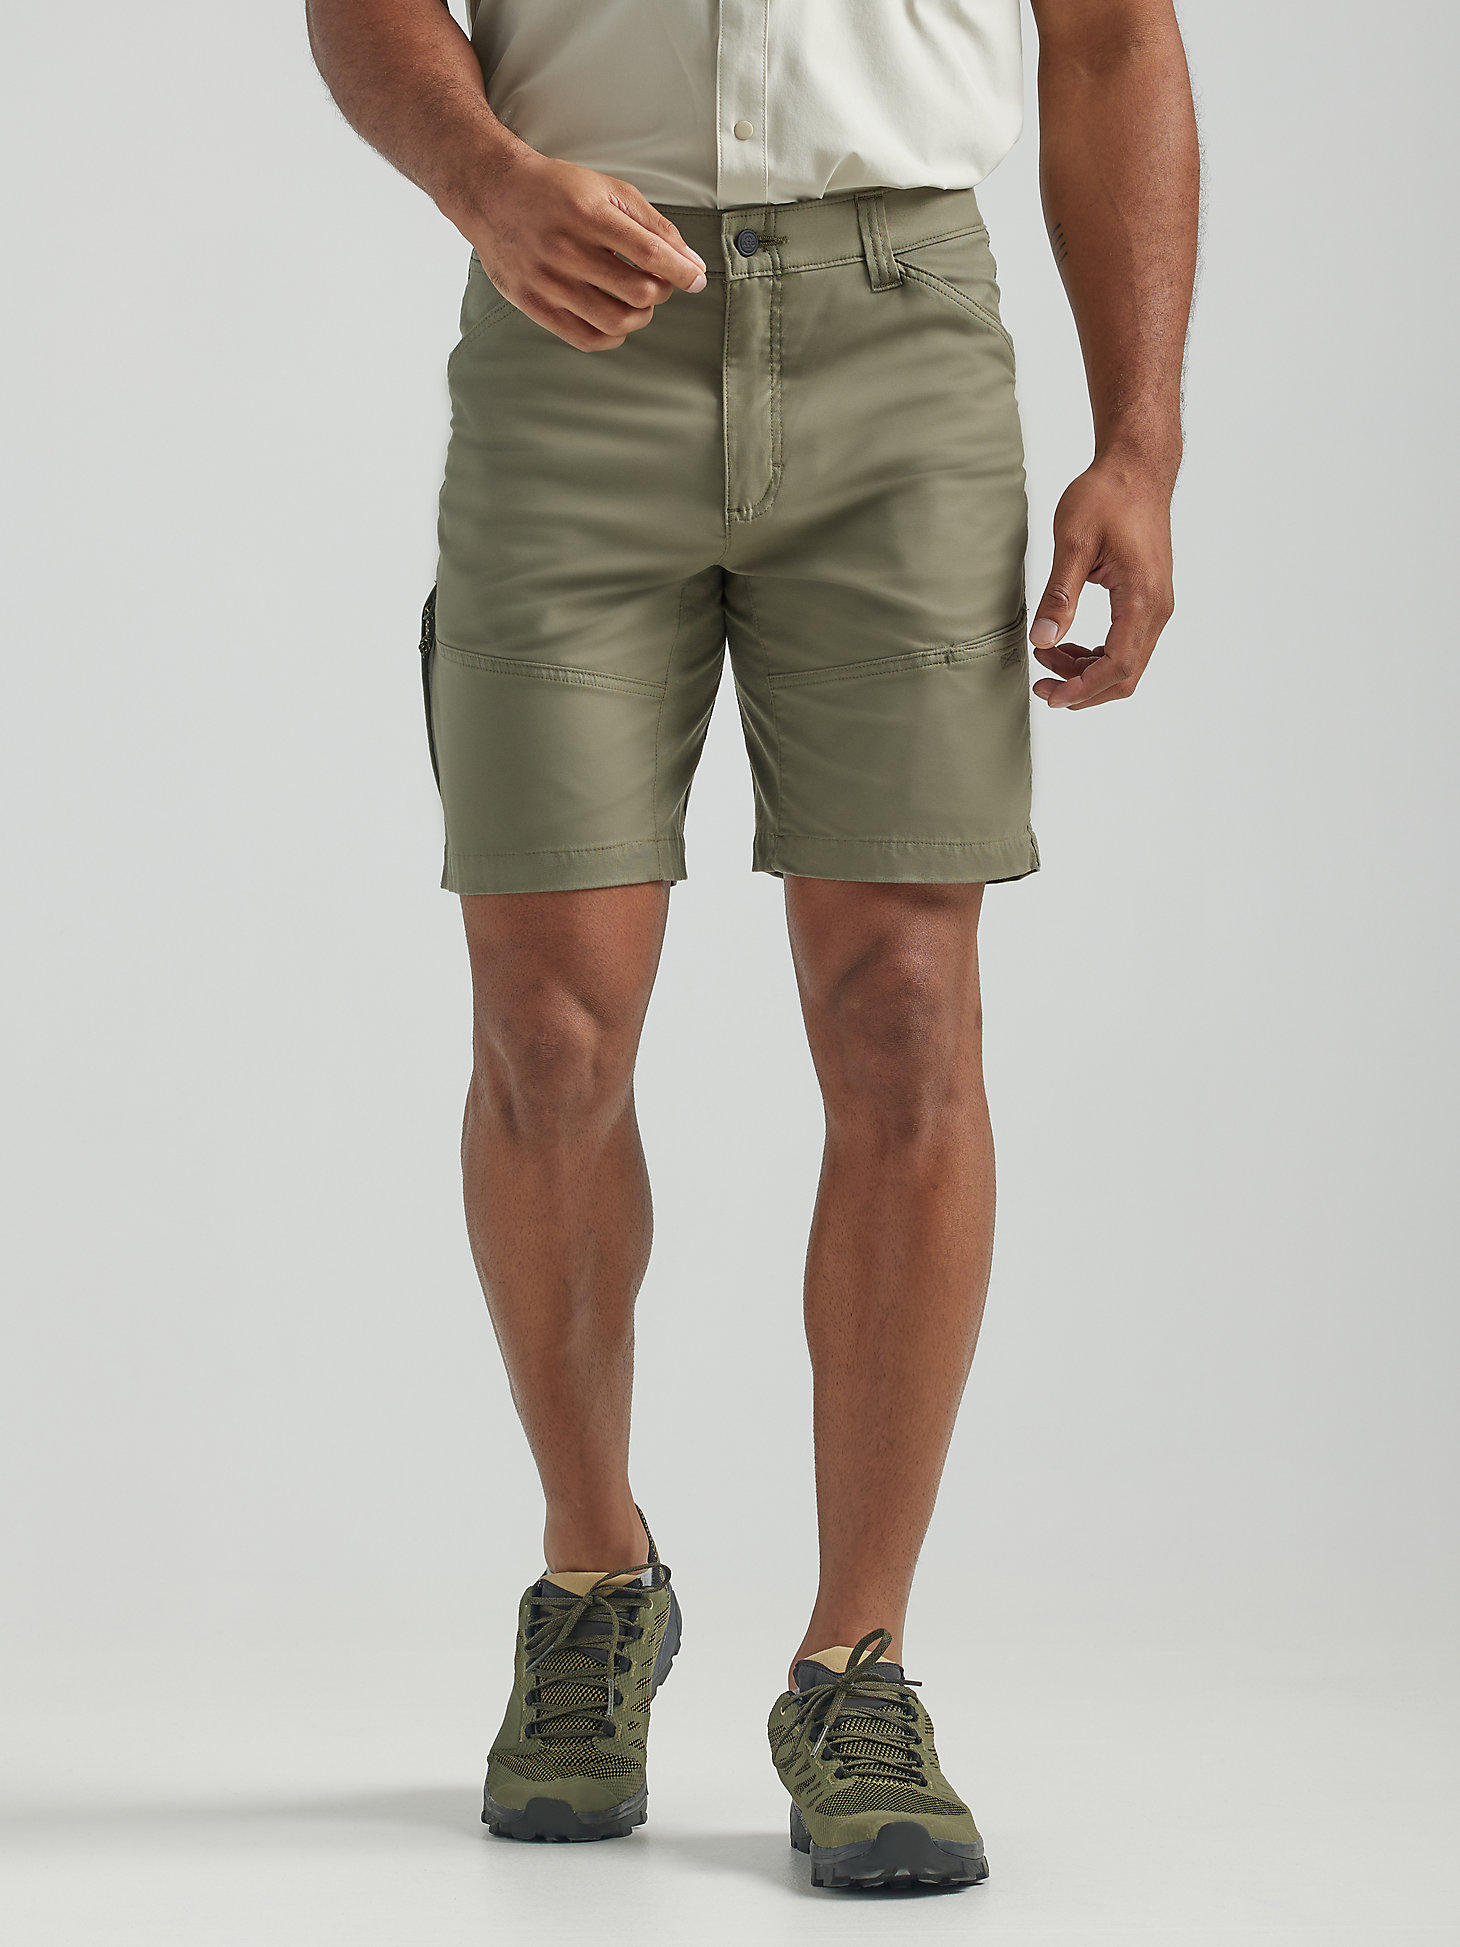 Rugged Trail Short in Dusty Olive main view